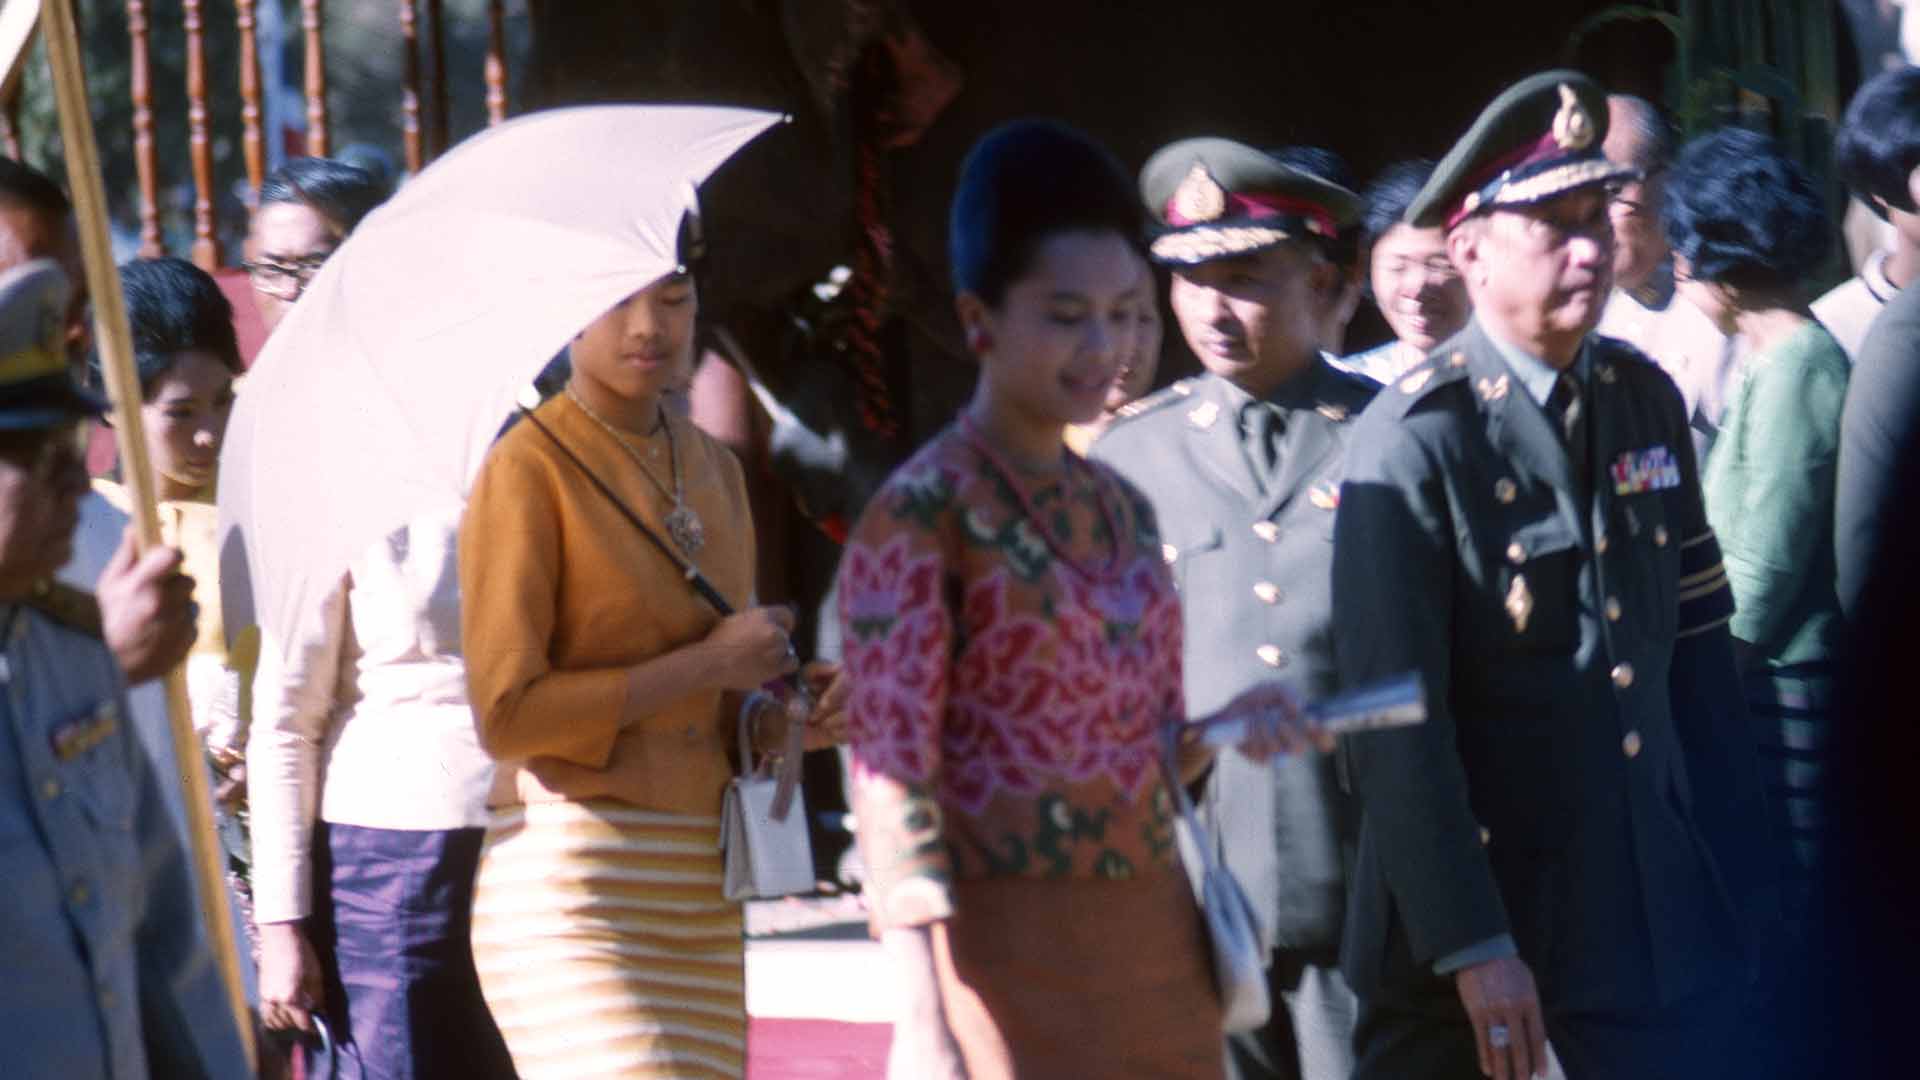 Two women arrive, escorted by military personnel